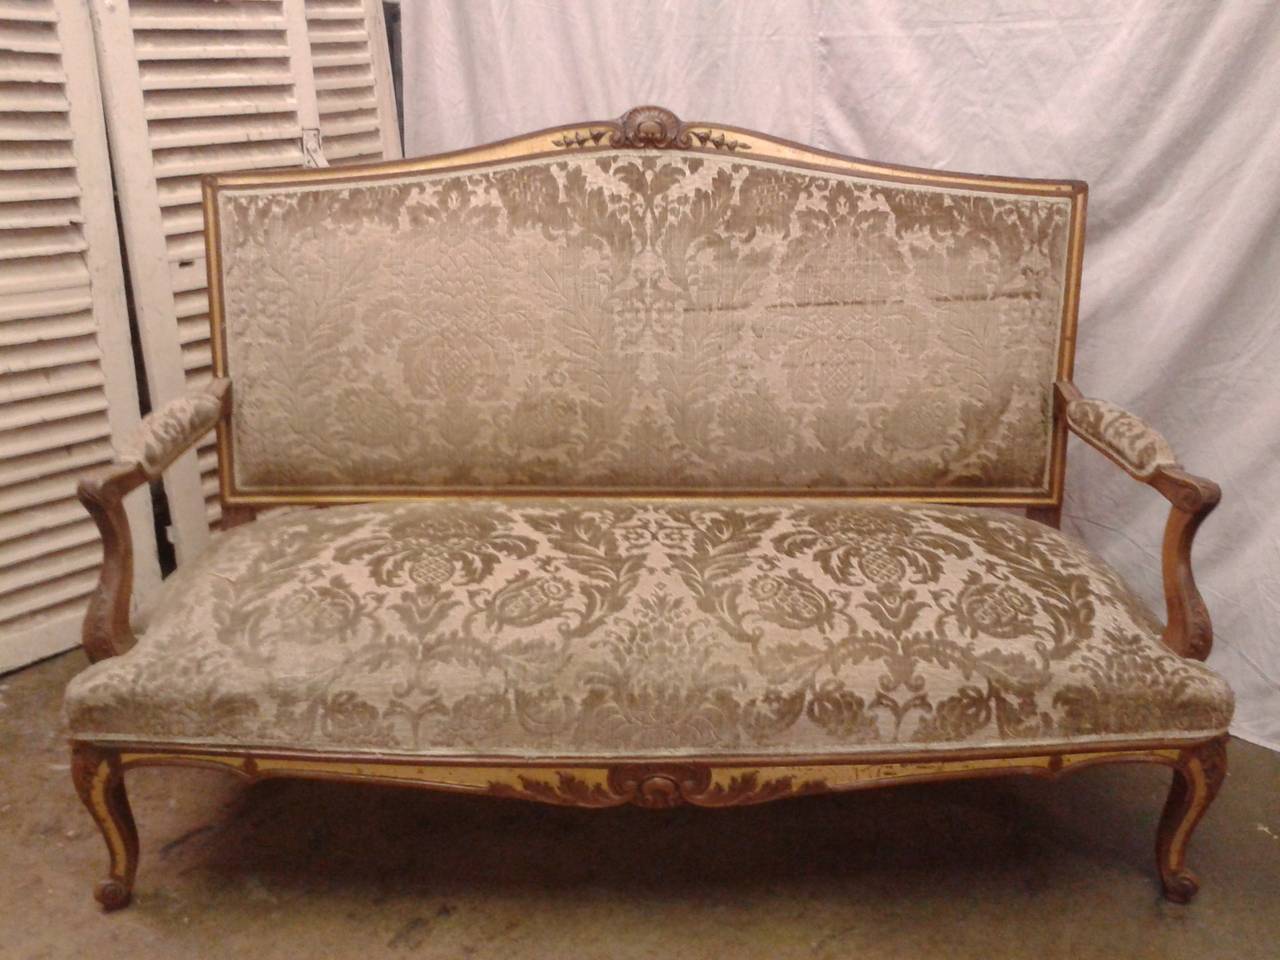 Pair of 19th century French sofas, natural and giltwood.